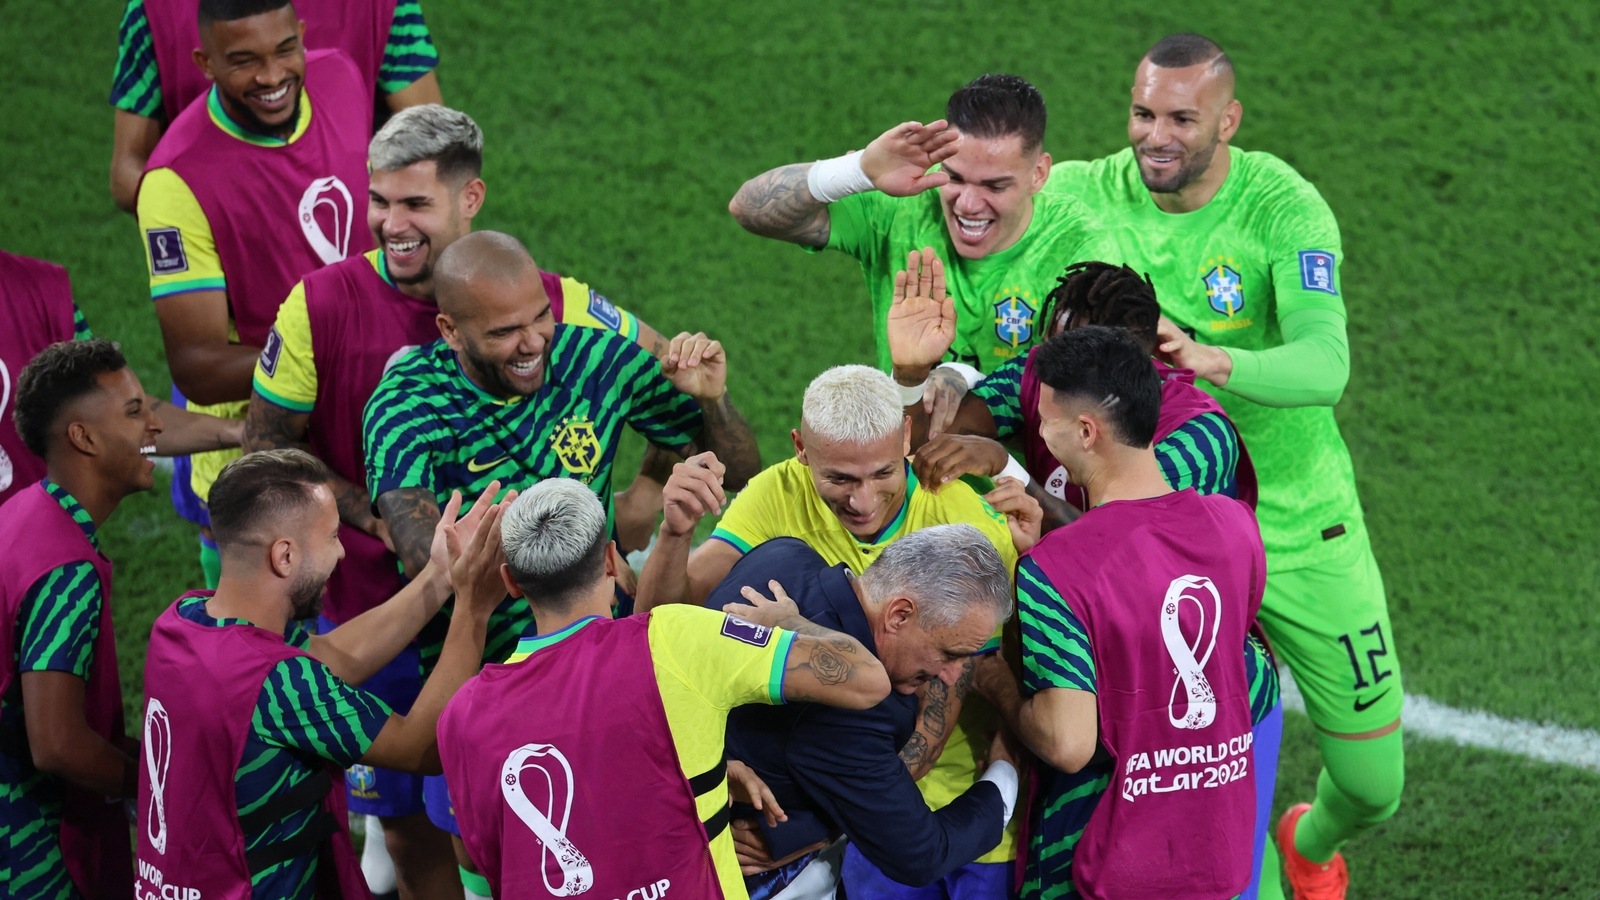 Watch – ‘Evil people will say it was disrespectful to Korea’: Brazil coach after dancing video with players crticised